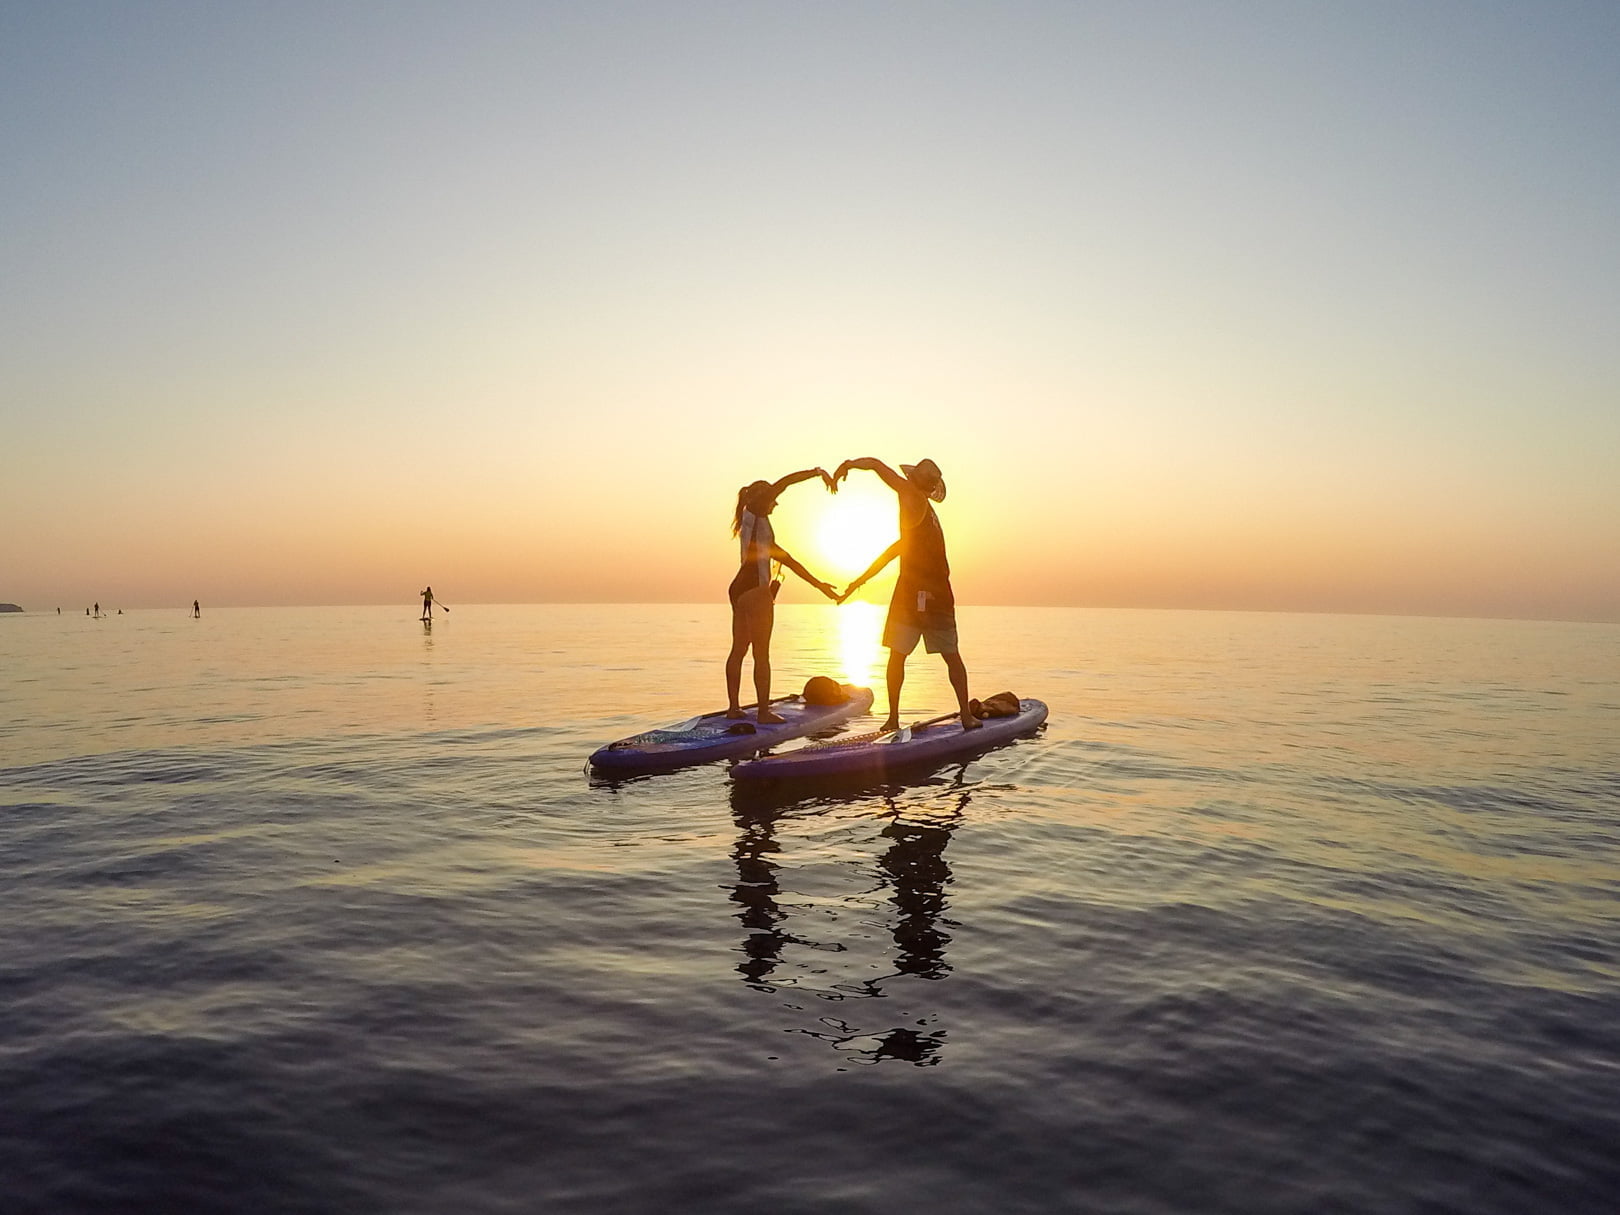 stand up paddle activity during sunset in rhodes island